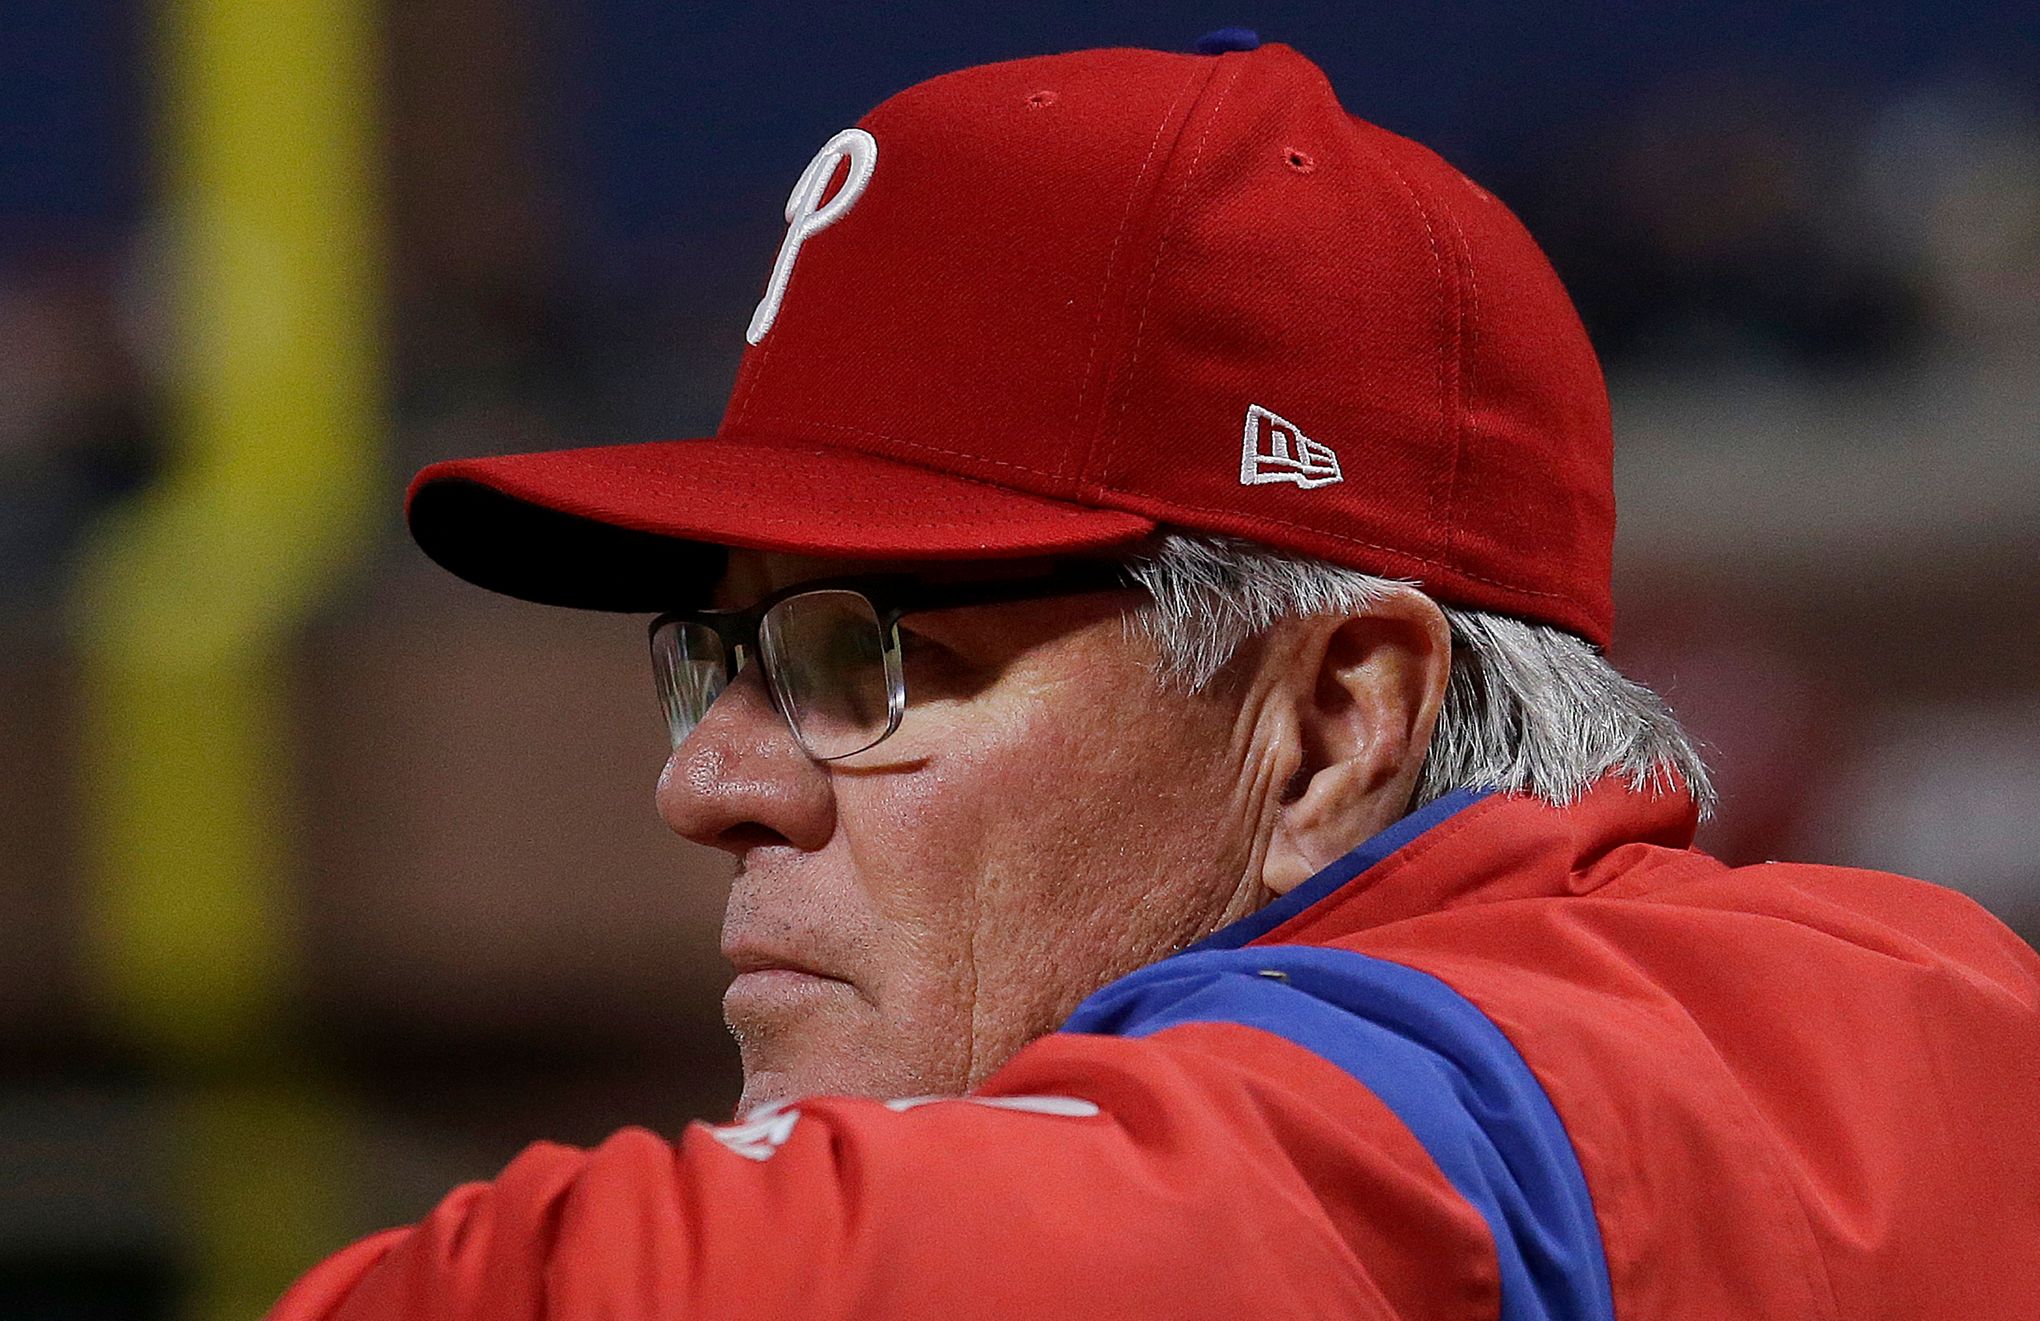 Top candidates to replace Ryne Sandberg as Phillies manager